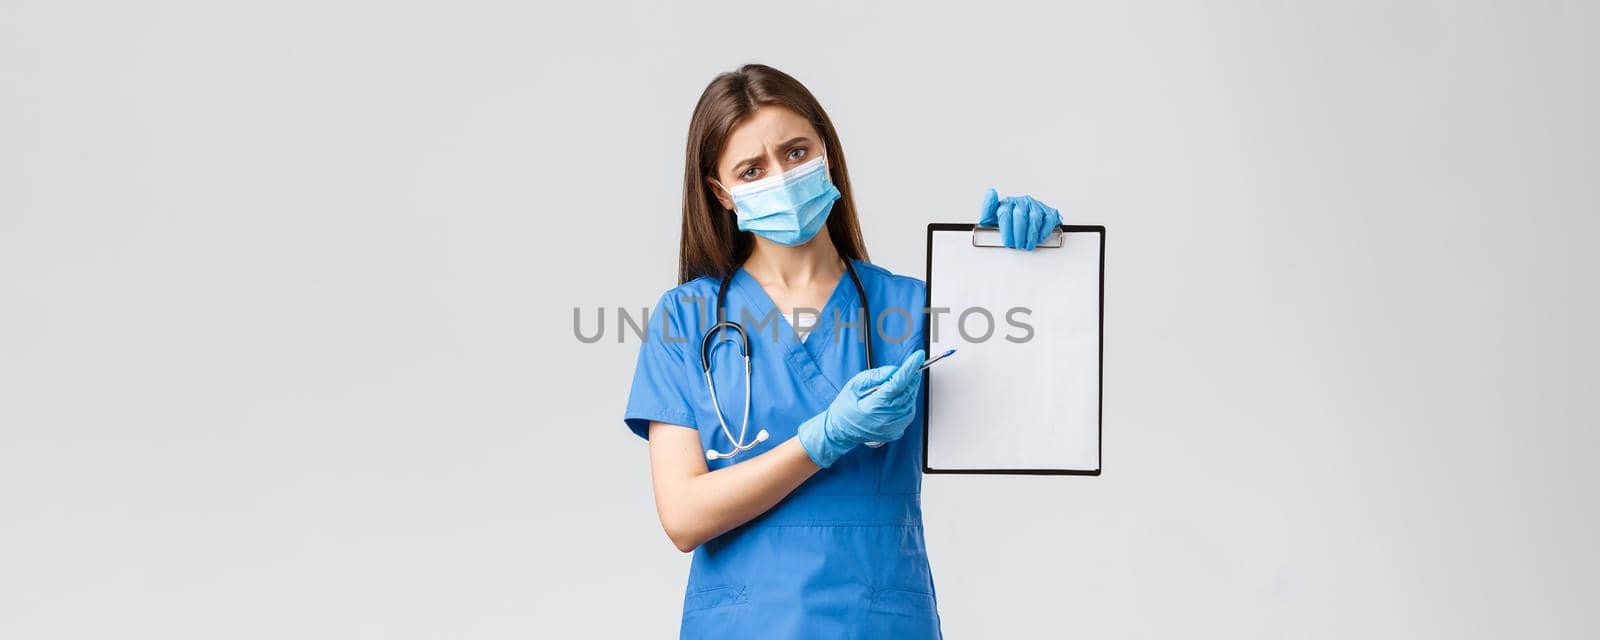 Covid-19, preventing virus, healthcare workers and quarantine concept. Tired concerned female nurse or doctor in blue scrubs, medical mask, explain importance use masks and gloves during coronavirus.